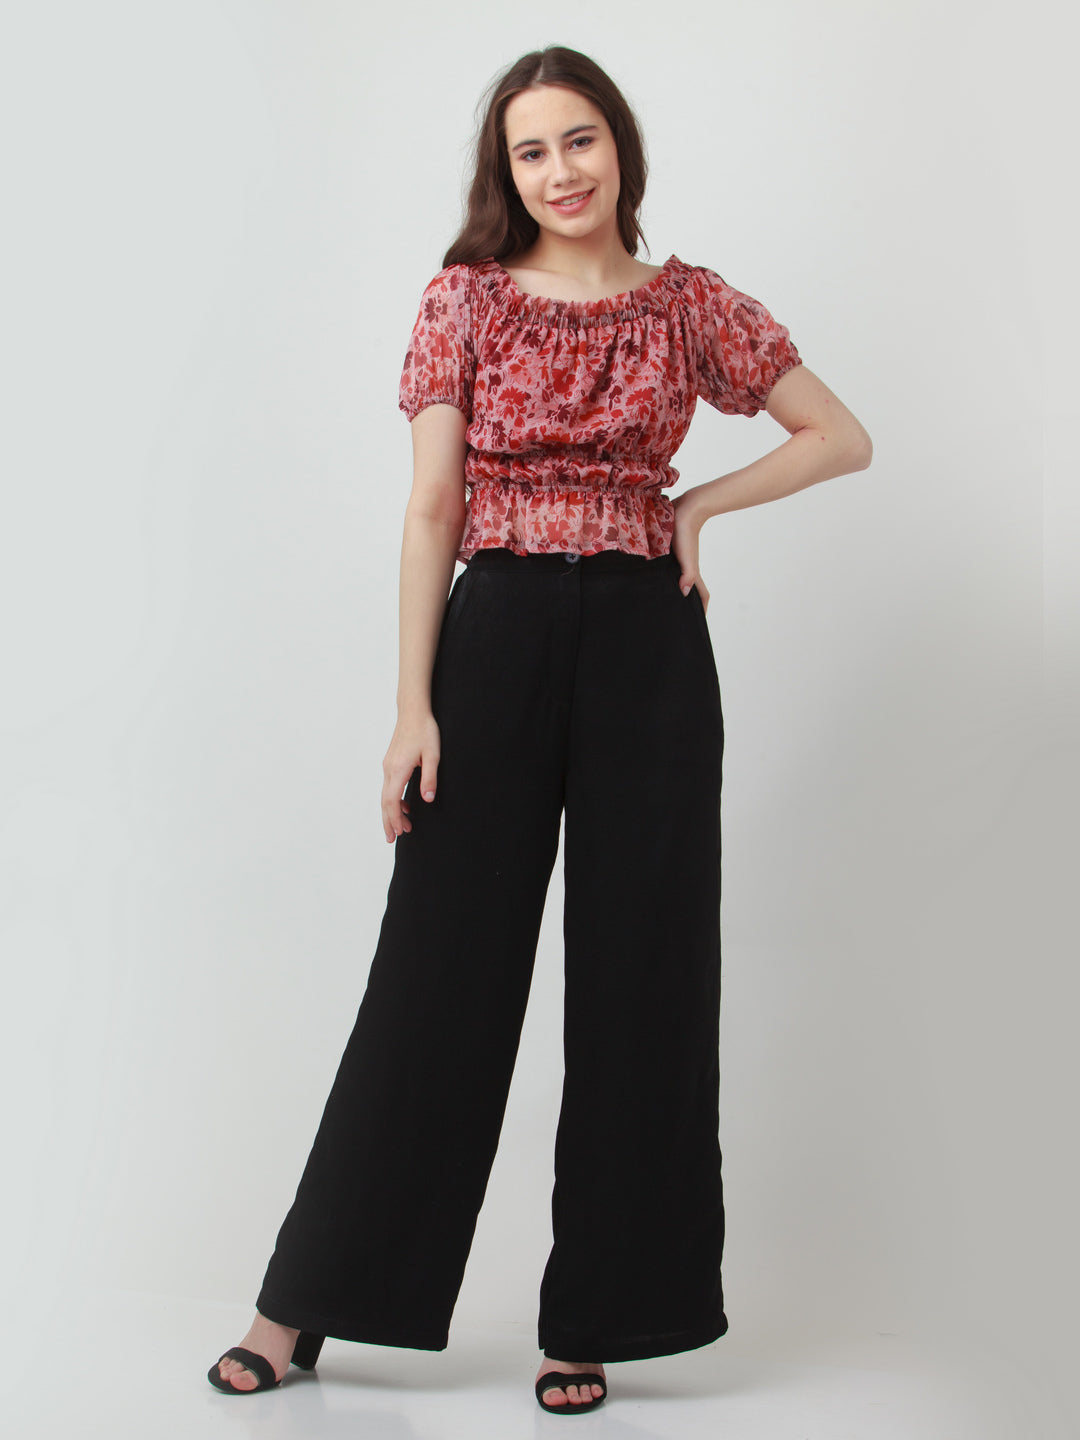 Black Solid Elasticated Trousers For Women